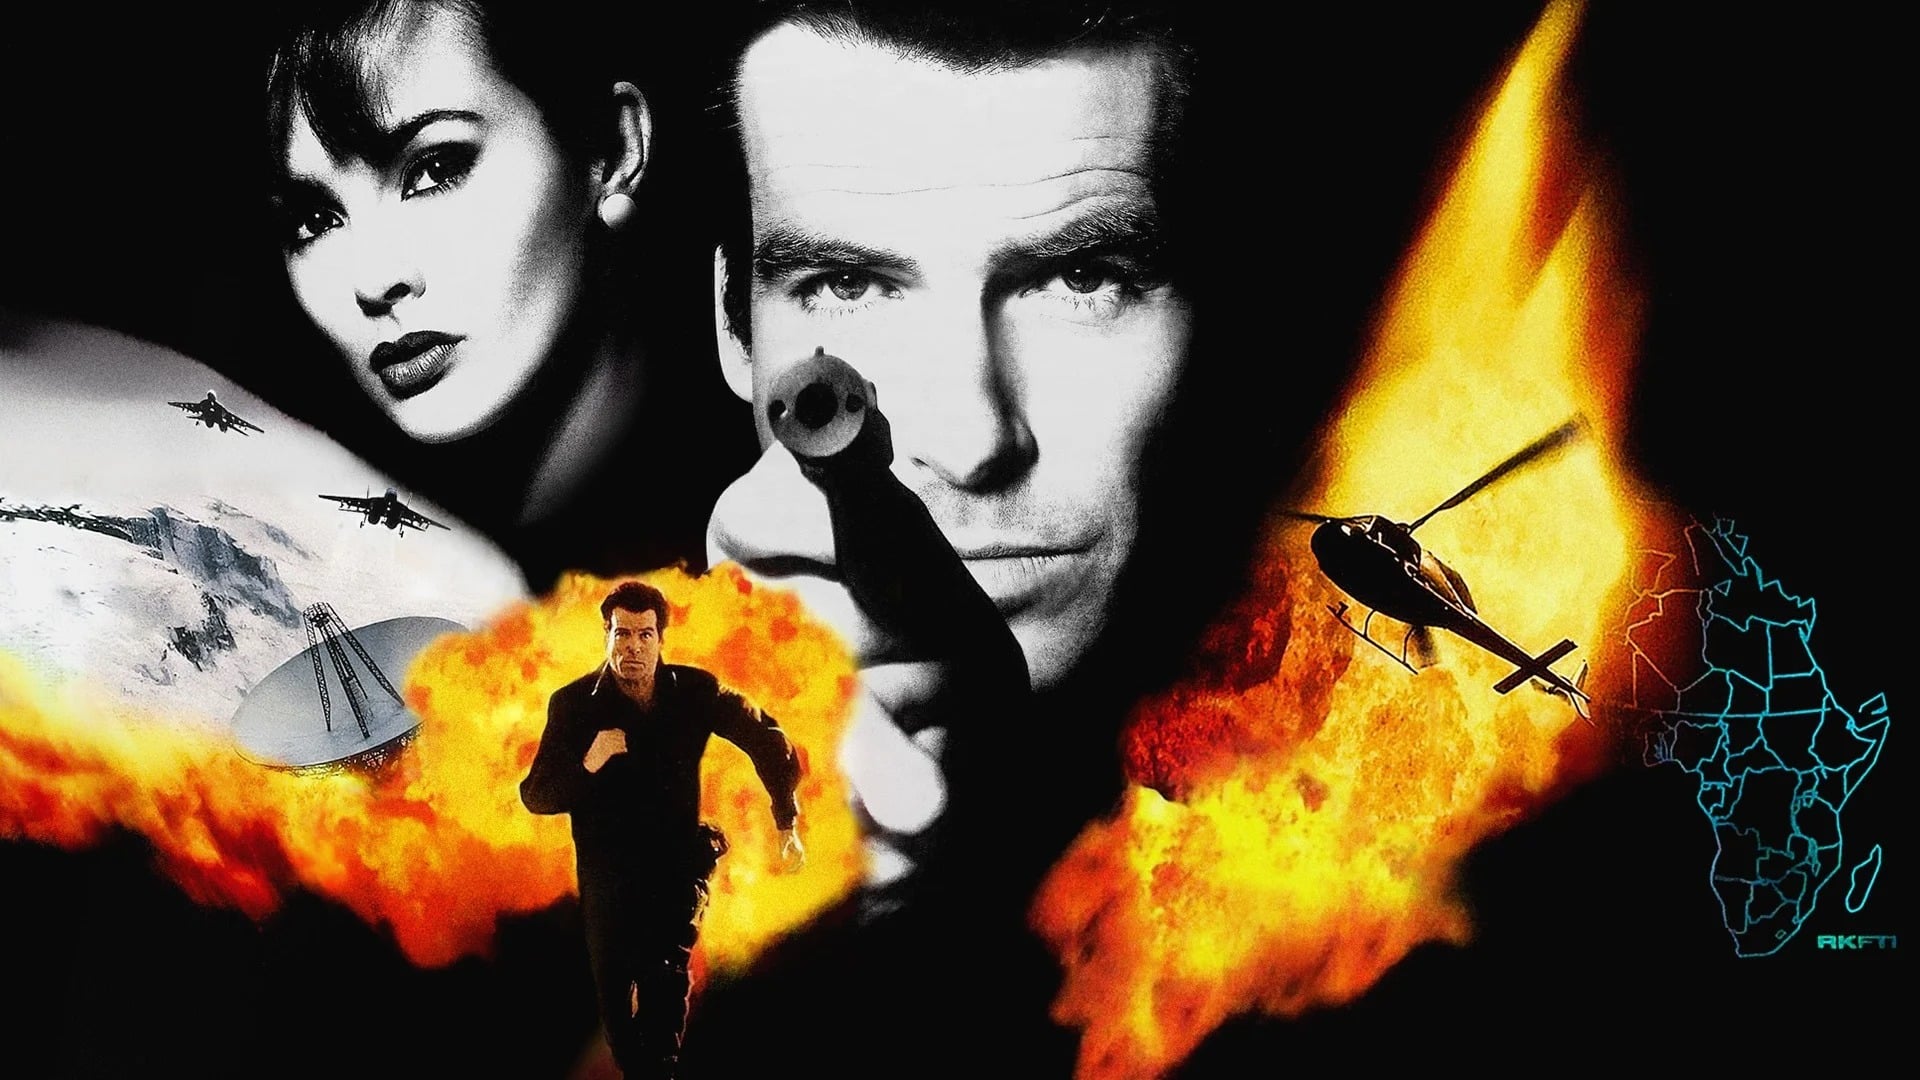 Coming to Xbox Game Pass: Hi-Fi Rush, GoldenEye 007, Age of Empires II:  Definitive Edition, and More - Xbox Wire